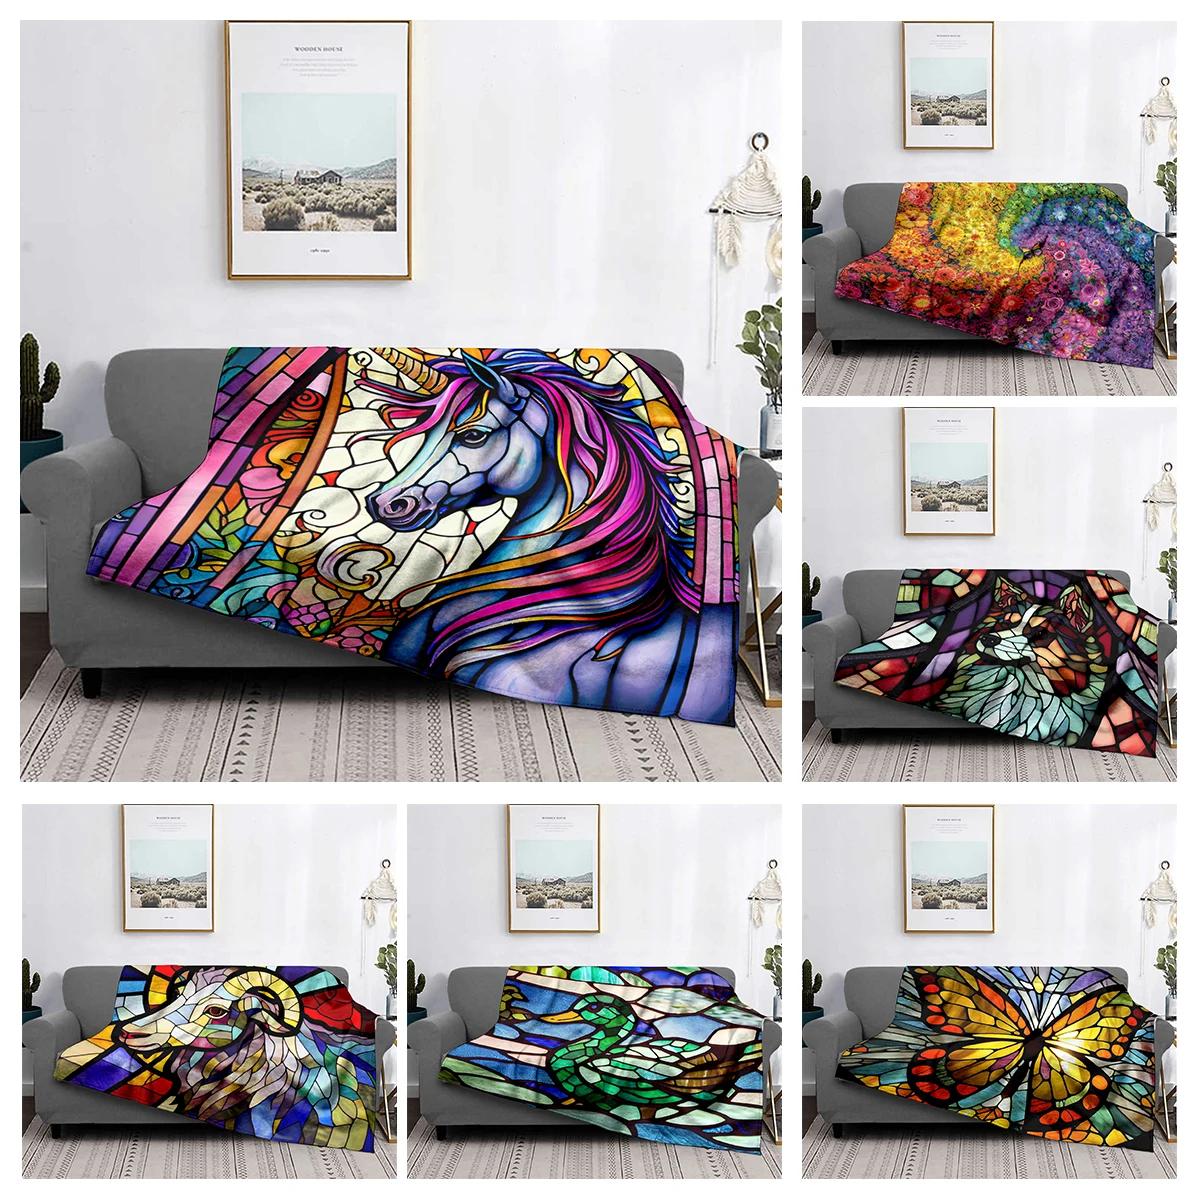 

Home decoration plush Sofa blanket Colorful Animal Bedspread on the bed anime fluffy soft blankets thick blanket for winte